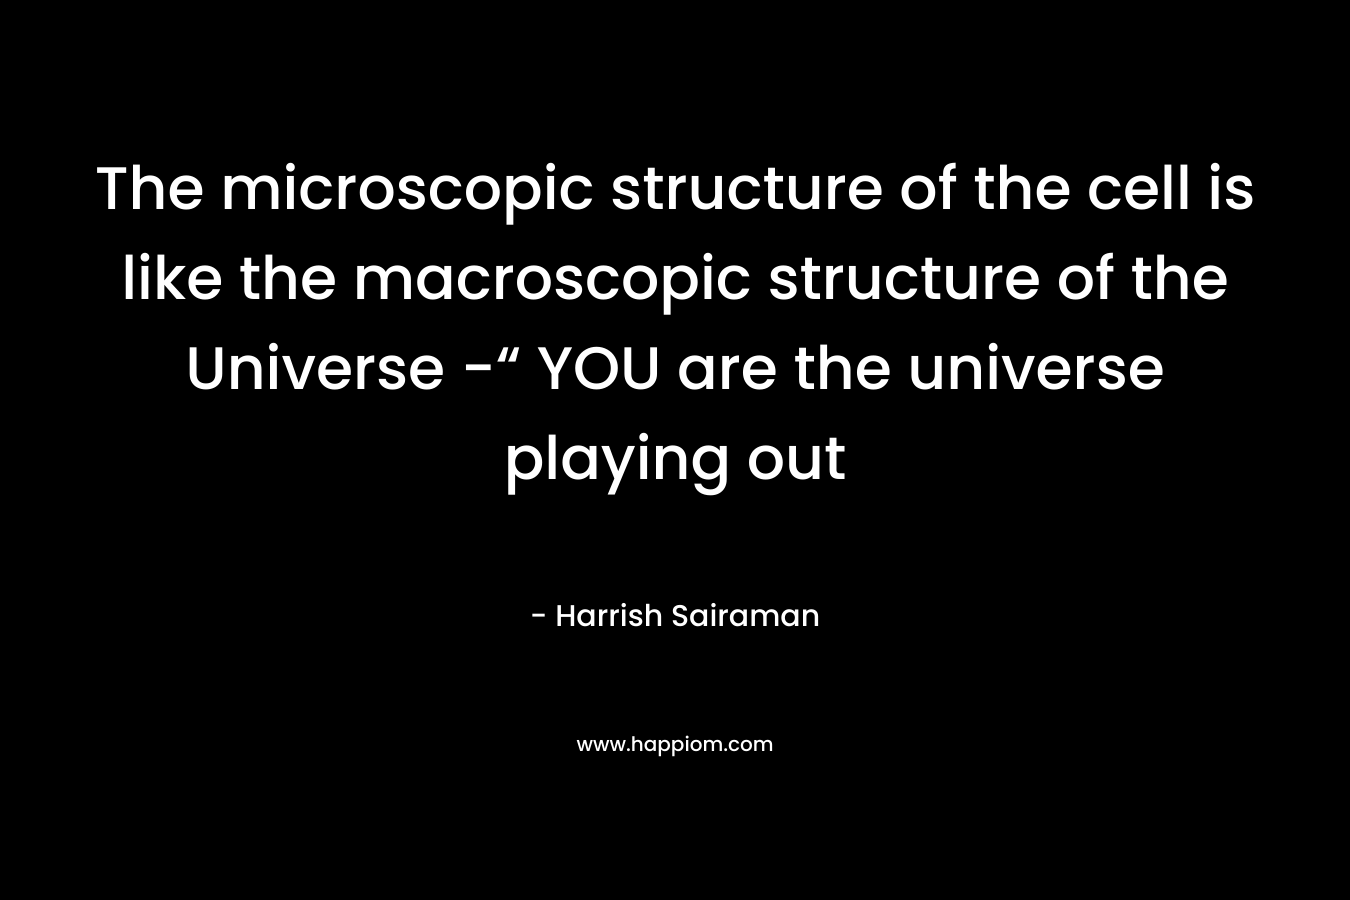 The microscopic structure of the cell is like the macroscopic structure of the Universe -“ YOU are the universe playing out